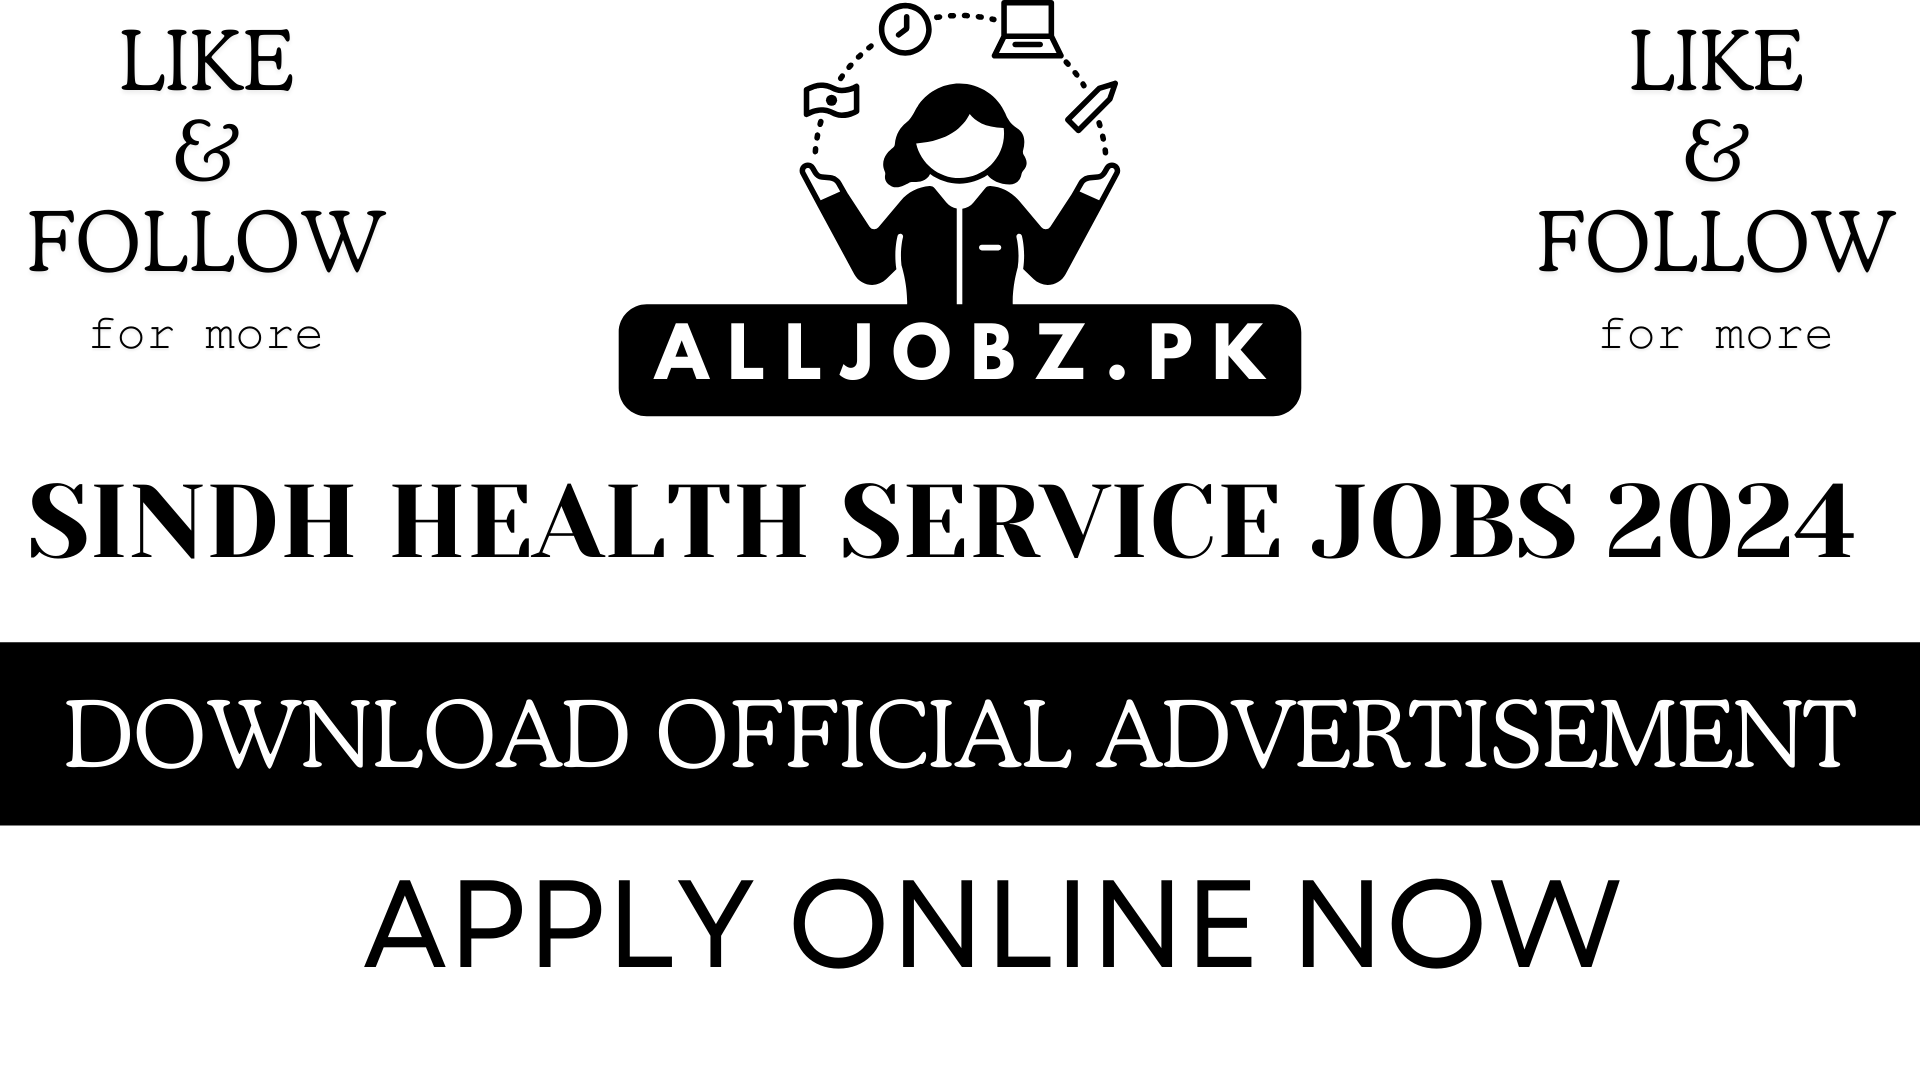 Sindh Integrated Emergency &Amp; Health Services Apply Online April Jobs 2024, Sindh Integrated Emergency &Amp; Health Services, Apply Online, April Jobs 2024, Emergency Medical Services, Health Services, Online Application, Job Opportunities, April 2024, Employment, Career, Recruitment, Hiring, Sindh, Integrated Services, Apply Now, Jobs, Vacancies, Opportunities, Employment Opportunities, Career Opportunities, Apply Online Now, April 2024 Jobs, Health Sector Jobs, Emergency Services, Health Care Jobs, Sindh Jobs, Online Application Process, Recruitment Drive, Hiring Now, Apply Today, Sindh Integrated Emergency Services, Health Service Careers, Apply Online Today, Latest Jobs, April 2024 Openings, Apply Online For April Jobs, Sindh Employment, Apply Online For Jobs, April 2024 Employment, Health Services Recruitment, Sindh Careers, Apply Online For April 2024 Jobs,